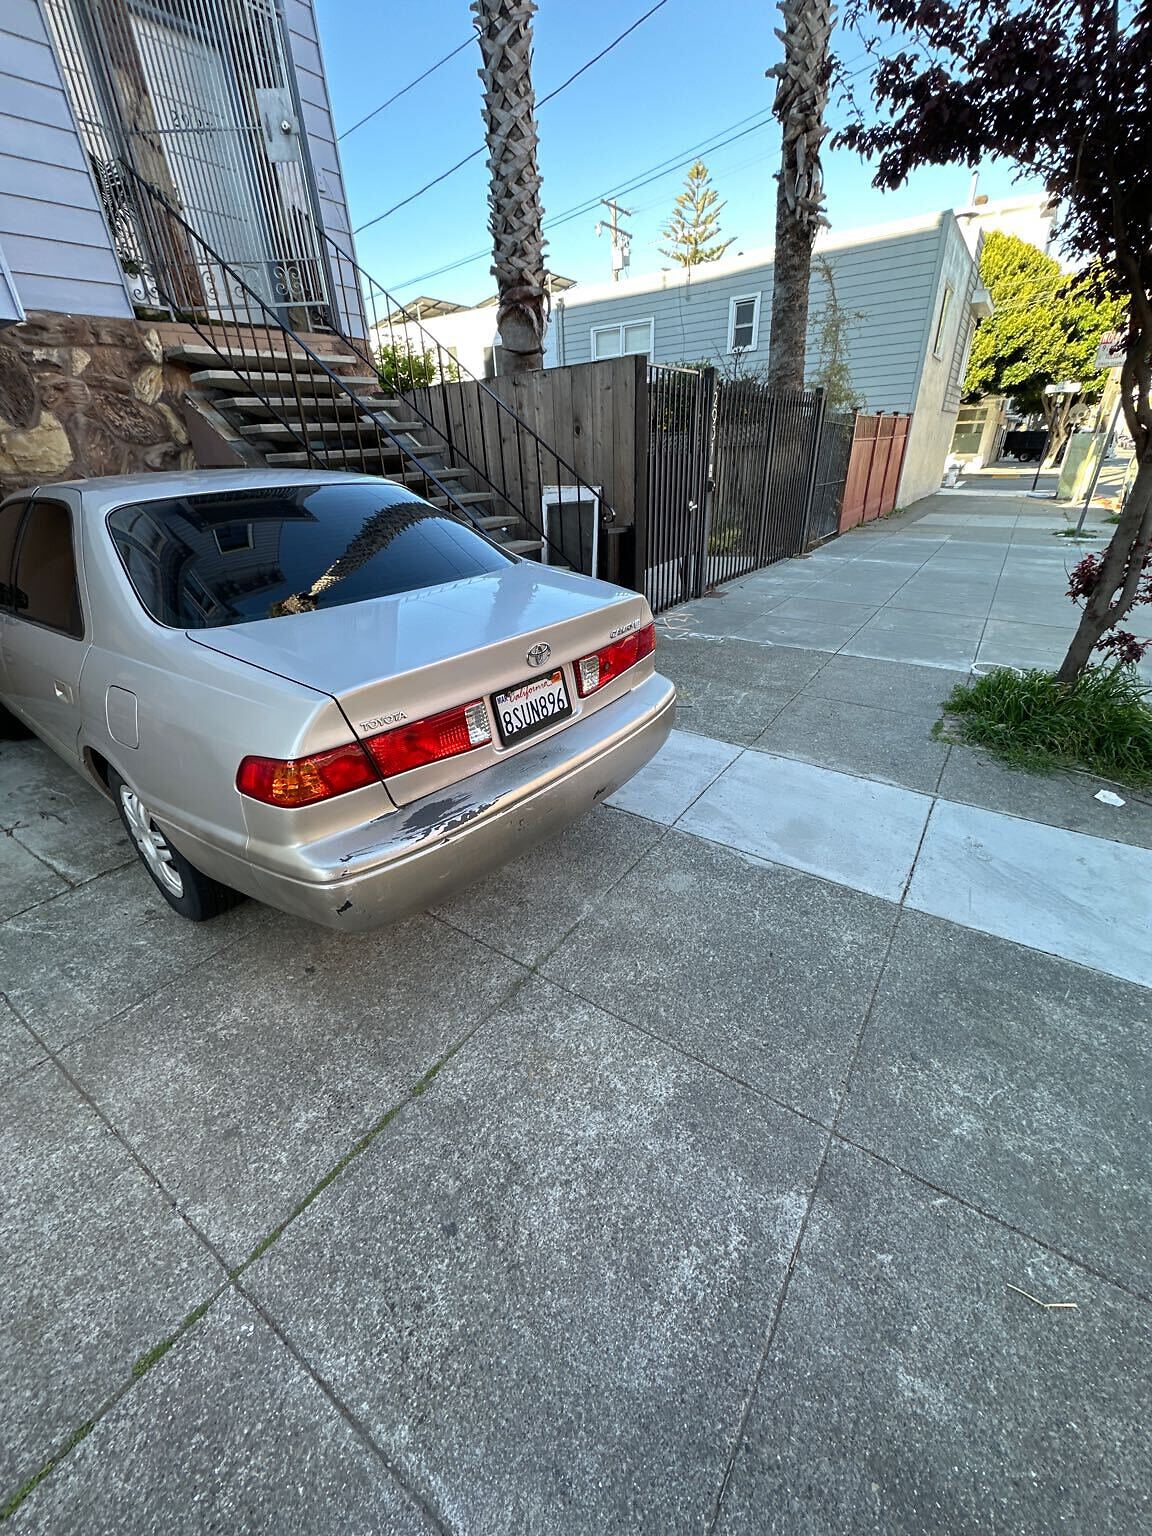 Photo of car in the street with license plate 8SUN896 in California